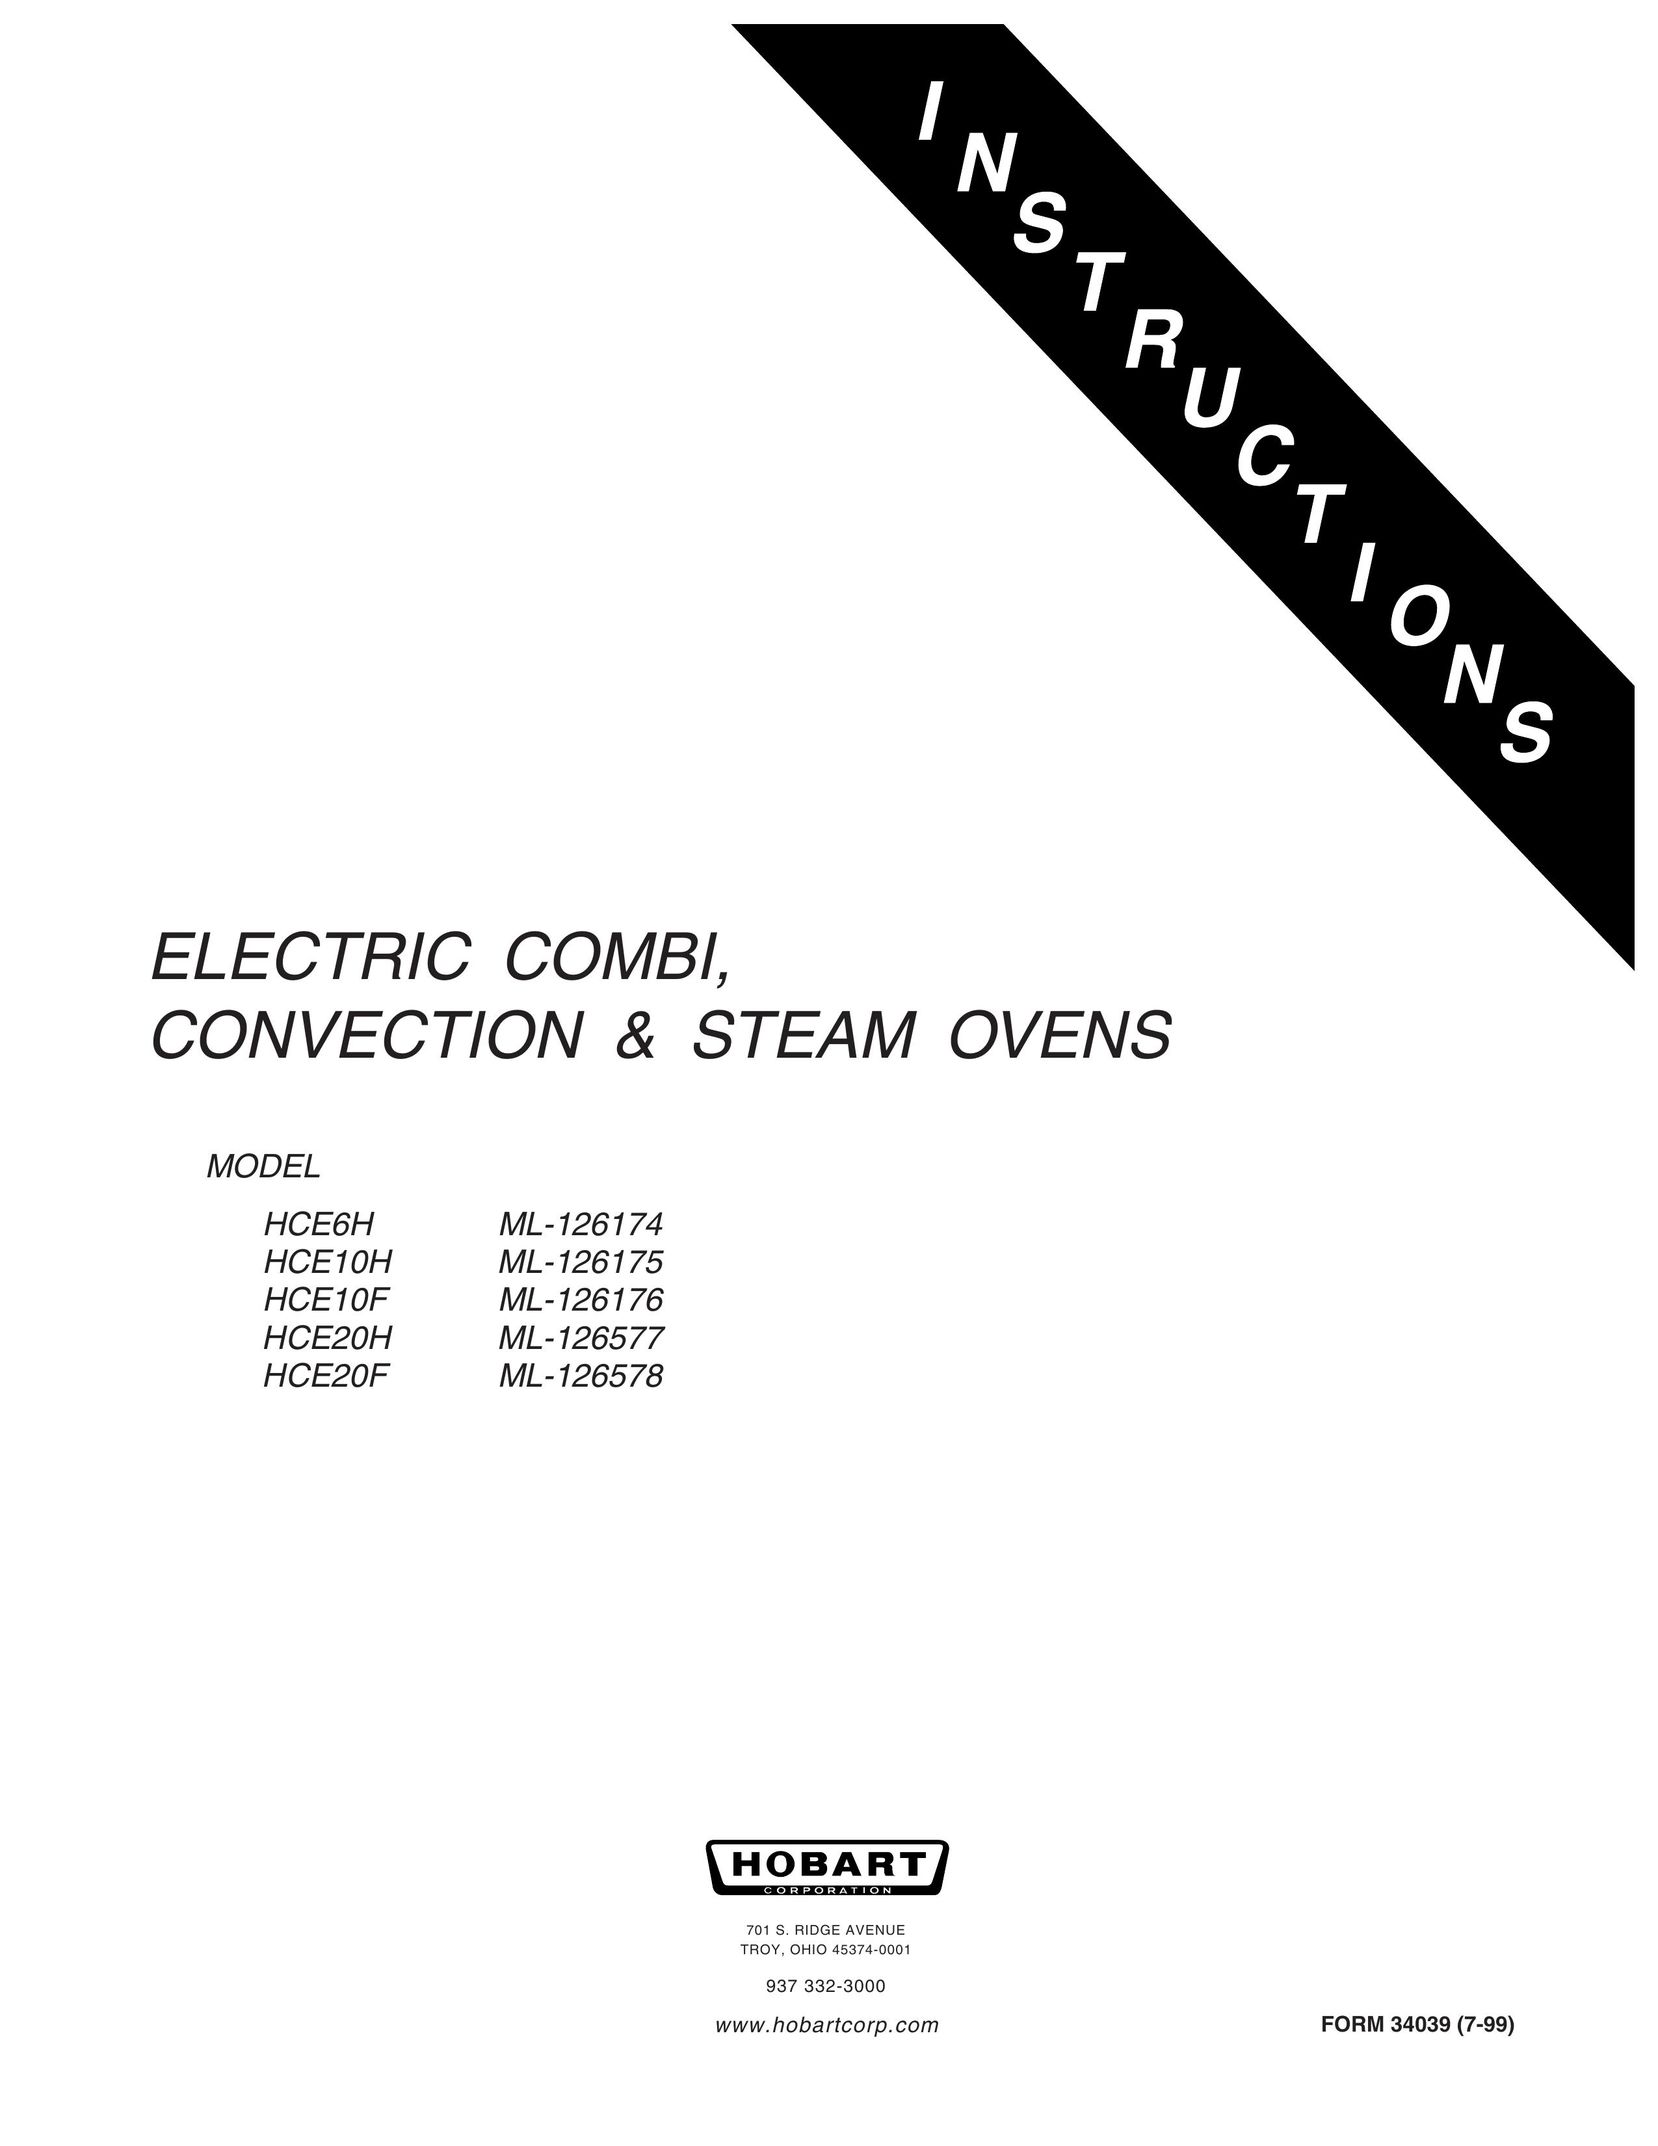 Hobart HCE20H ML-126577 Convection Oven User Manual